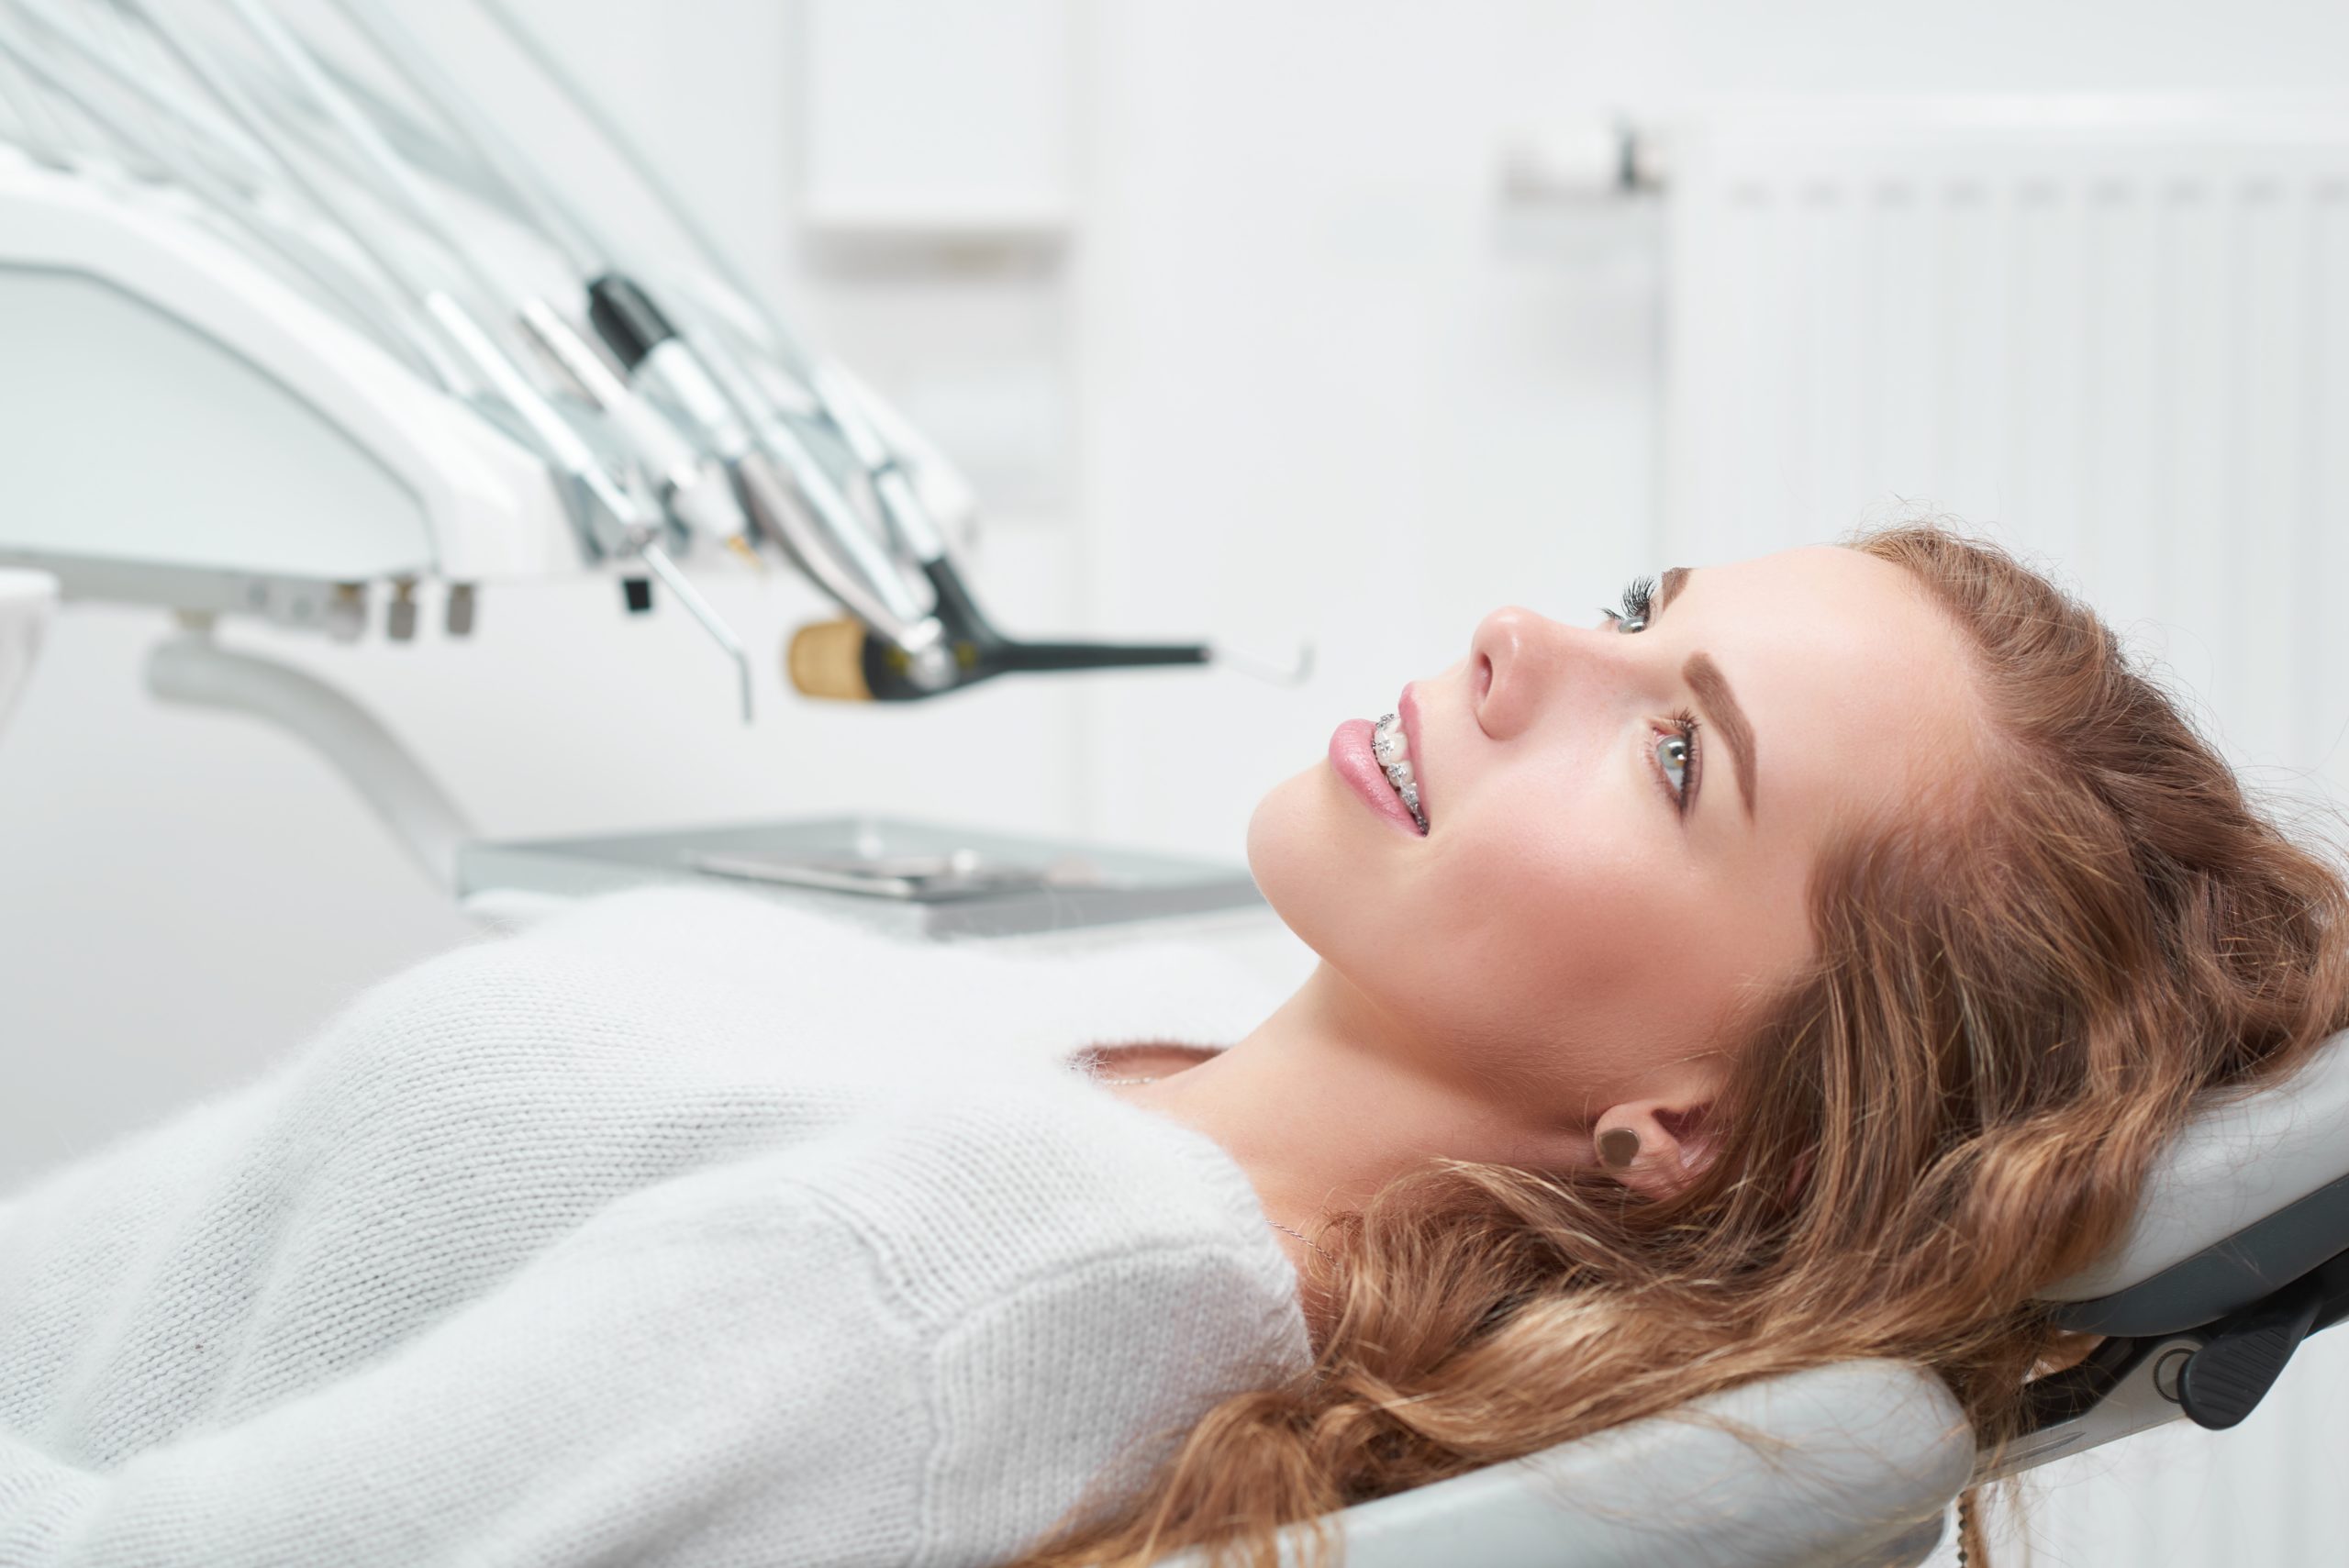 Transform your smile with Rivers Bend Family Dental! Our cosmetic dentist in Ramsey, MN provides top-notch services.